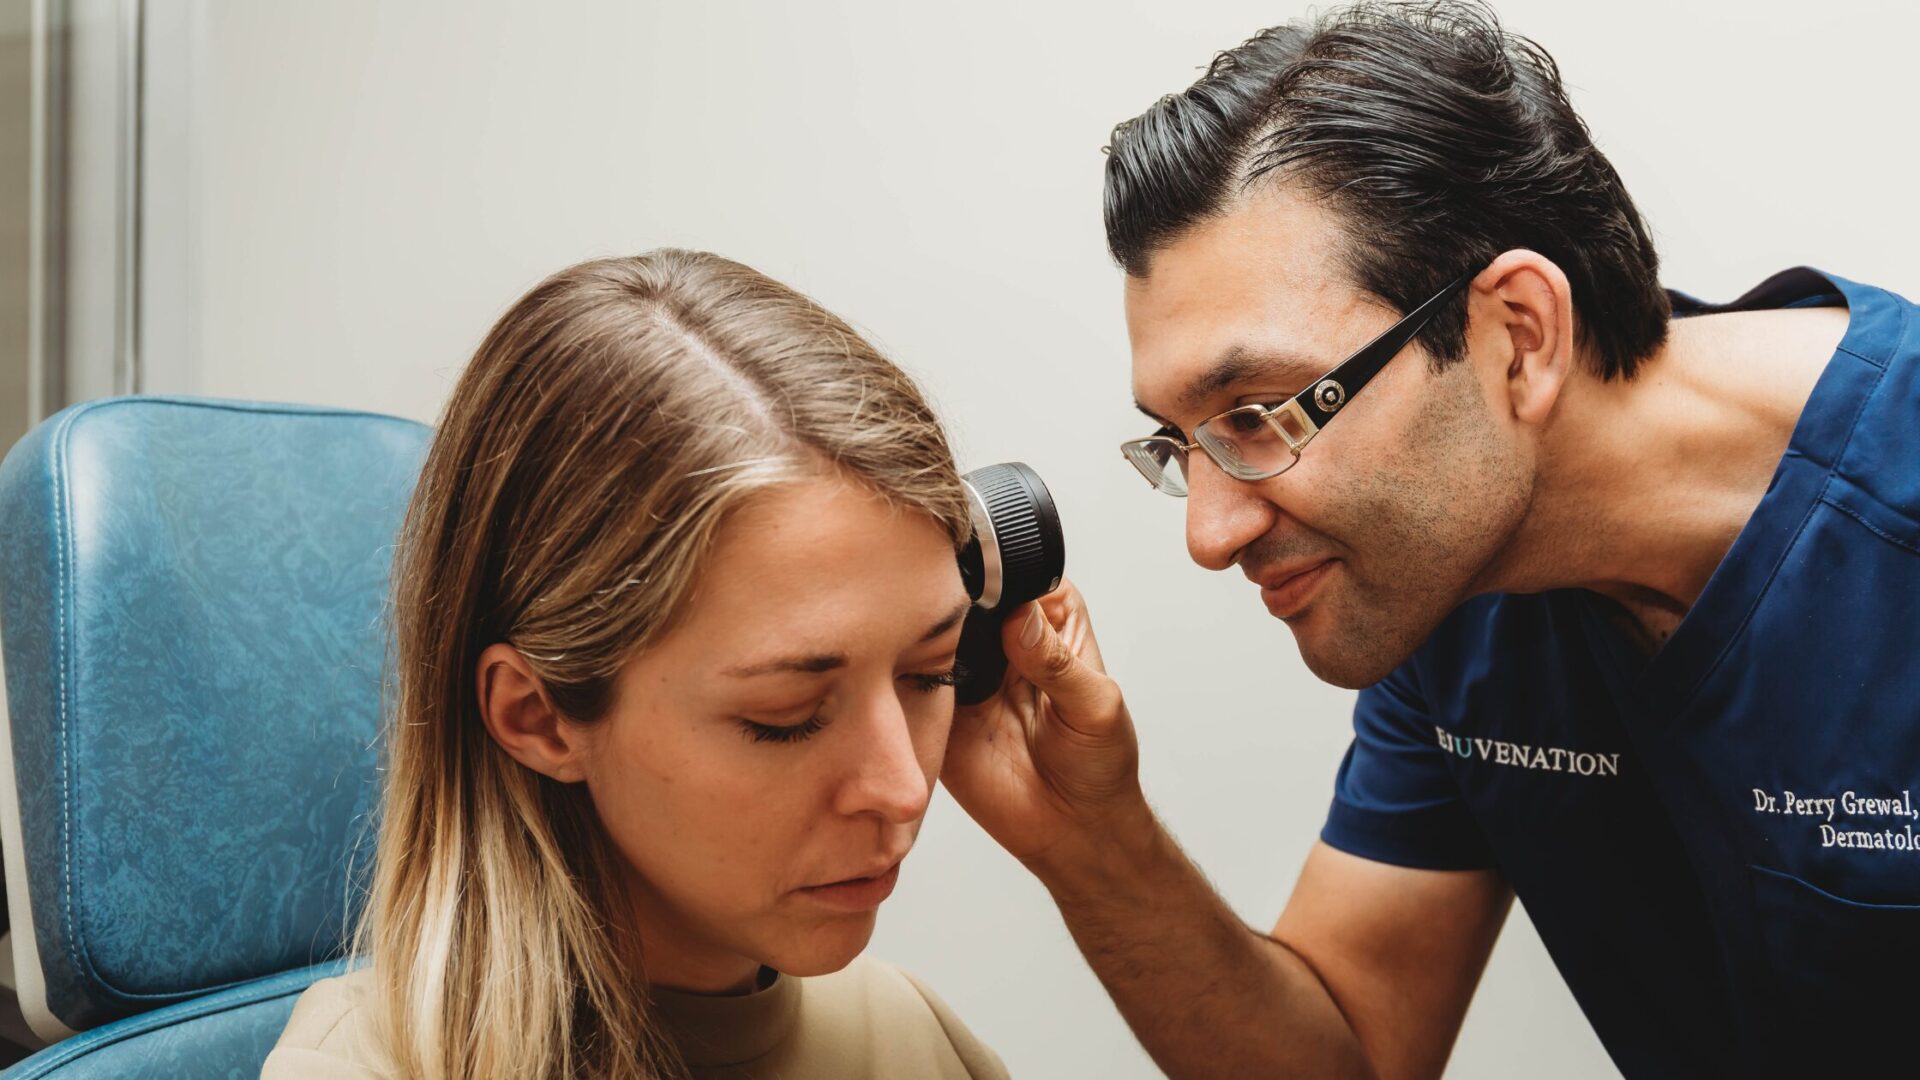 Dr. Perry Grewal specialized in dermatology and examines a patient's skin closely, assessing for any irregularities, conditions, or areas of concern. 